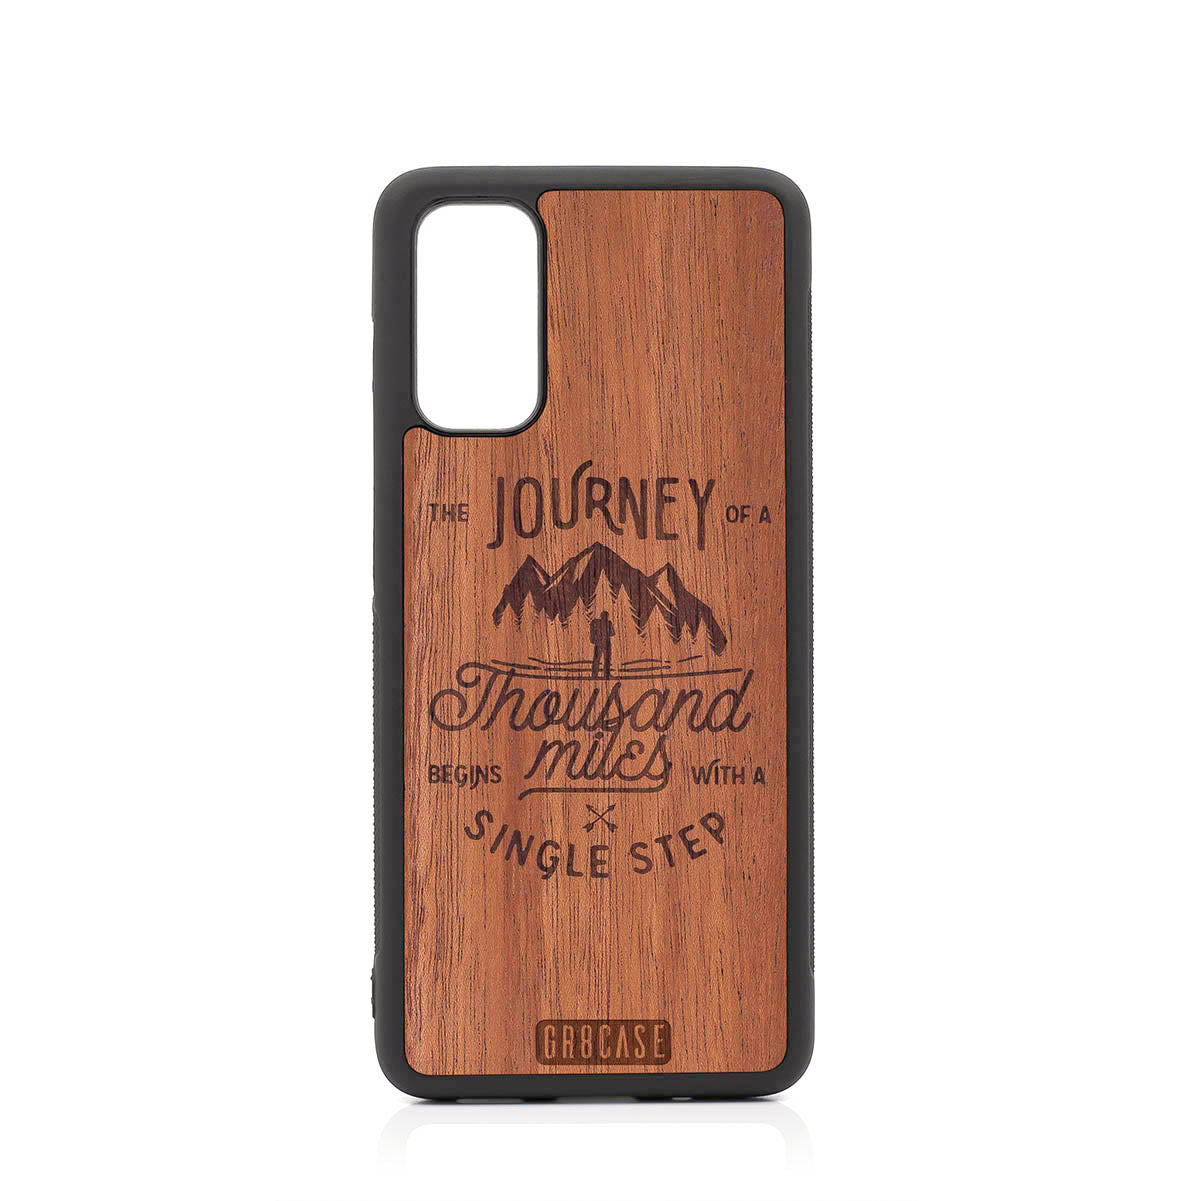 The Journey Of A Thousand Miles Begins With A Single Step Design Wood Case For Samsung Galaxy S20